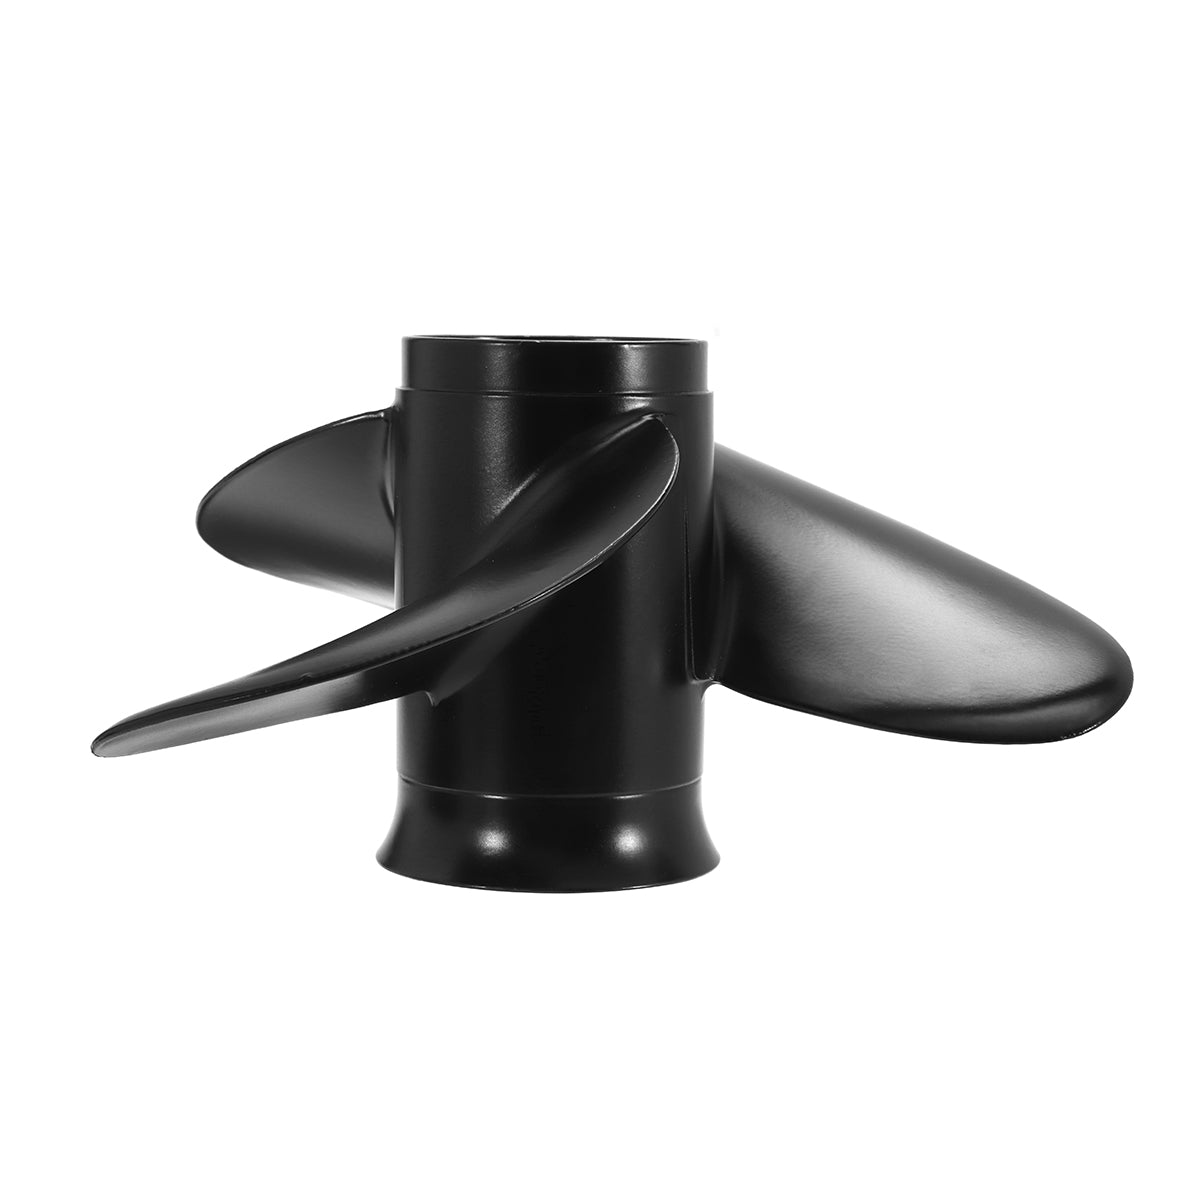 Black 9.25 x 11 Outboard Propeller For Mercury Tohatsu Nissan 9.9-20HP 48-897754A11